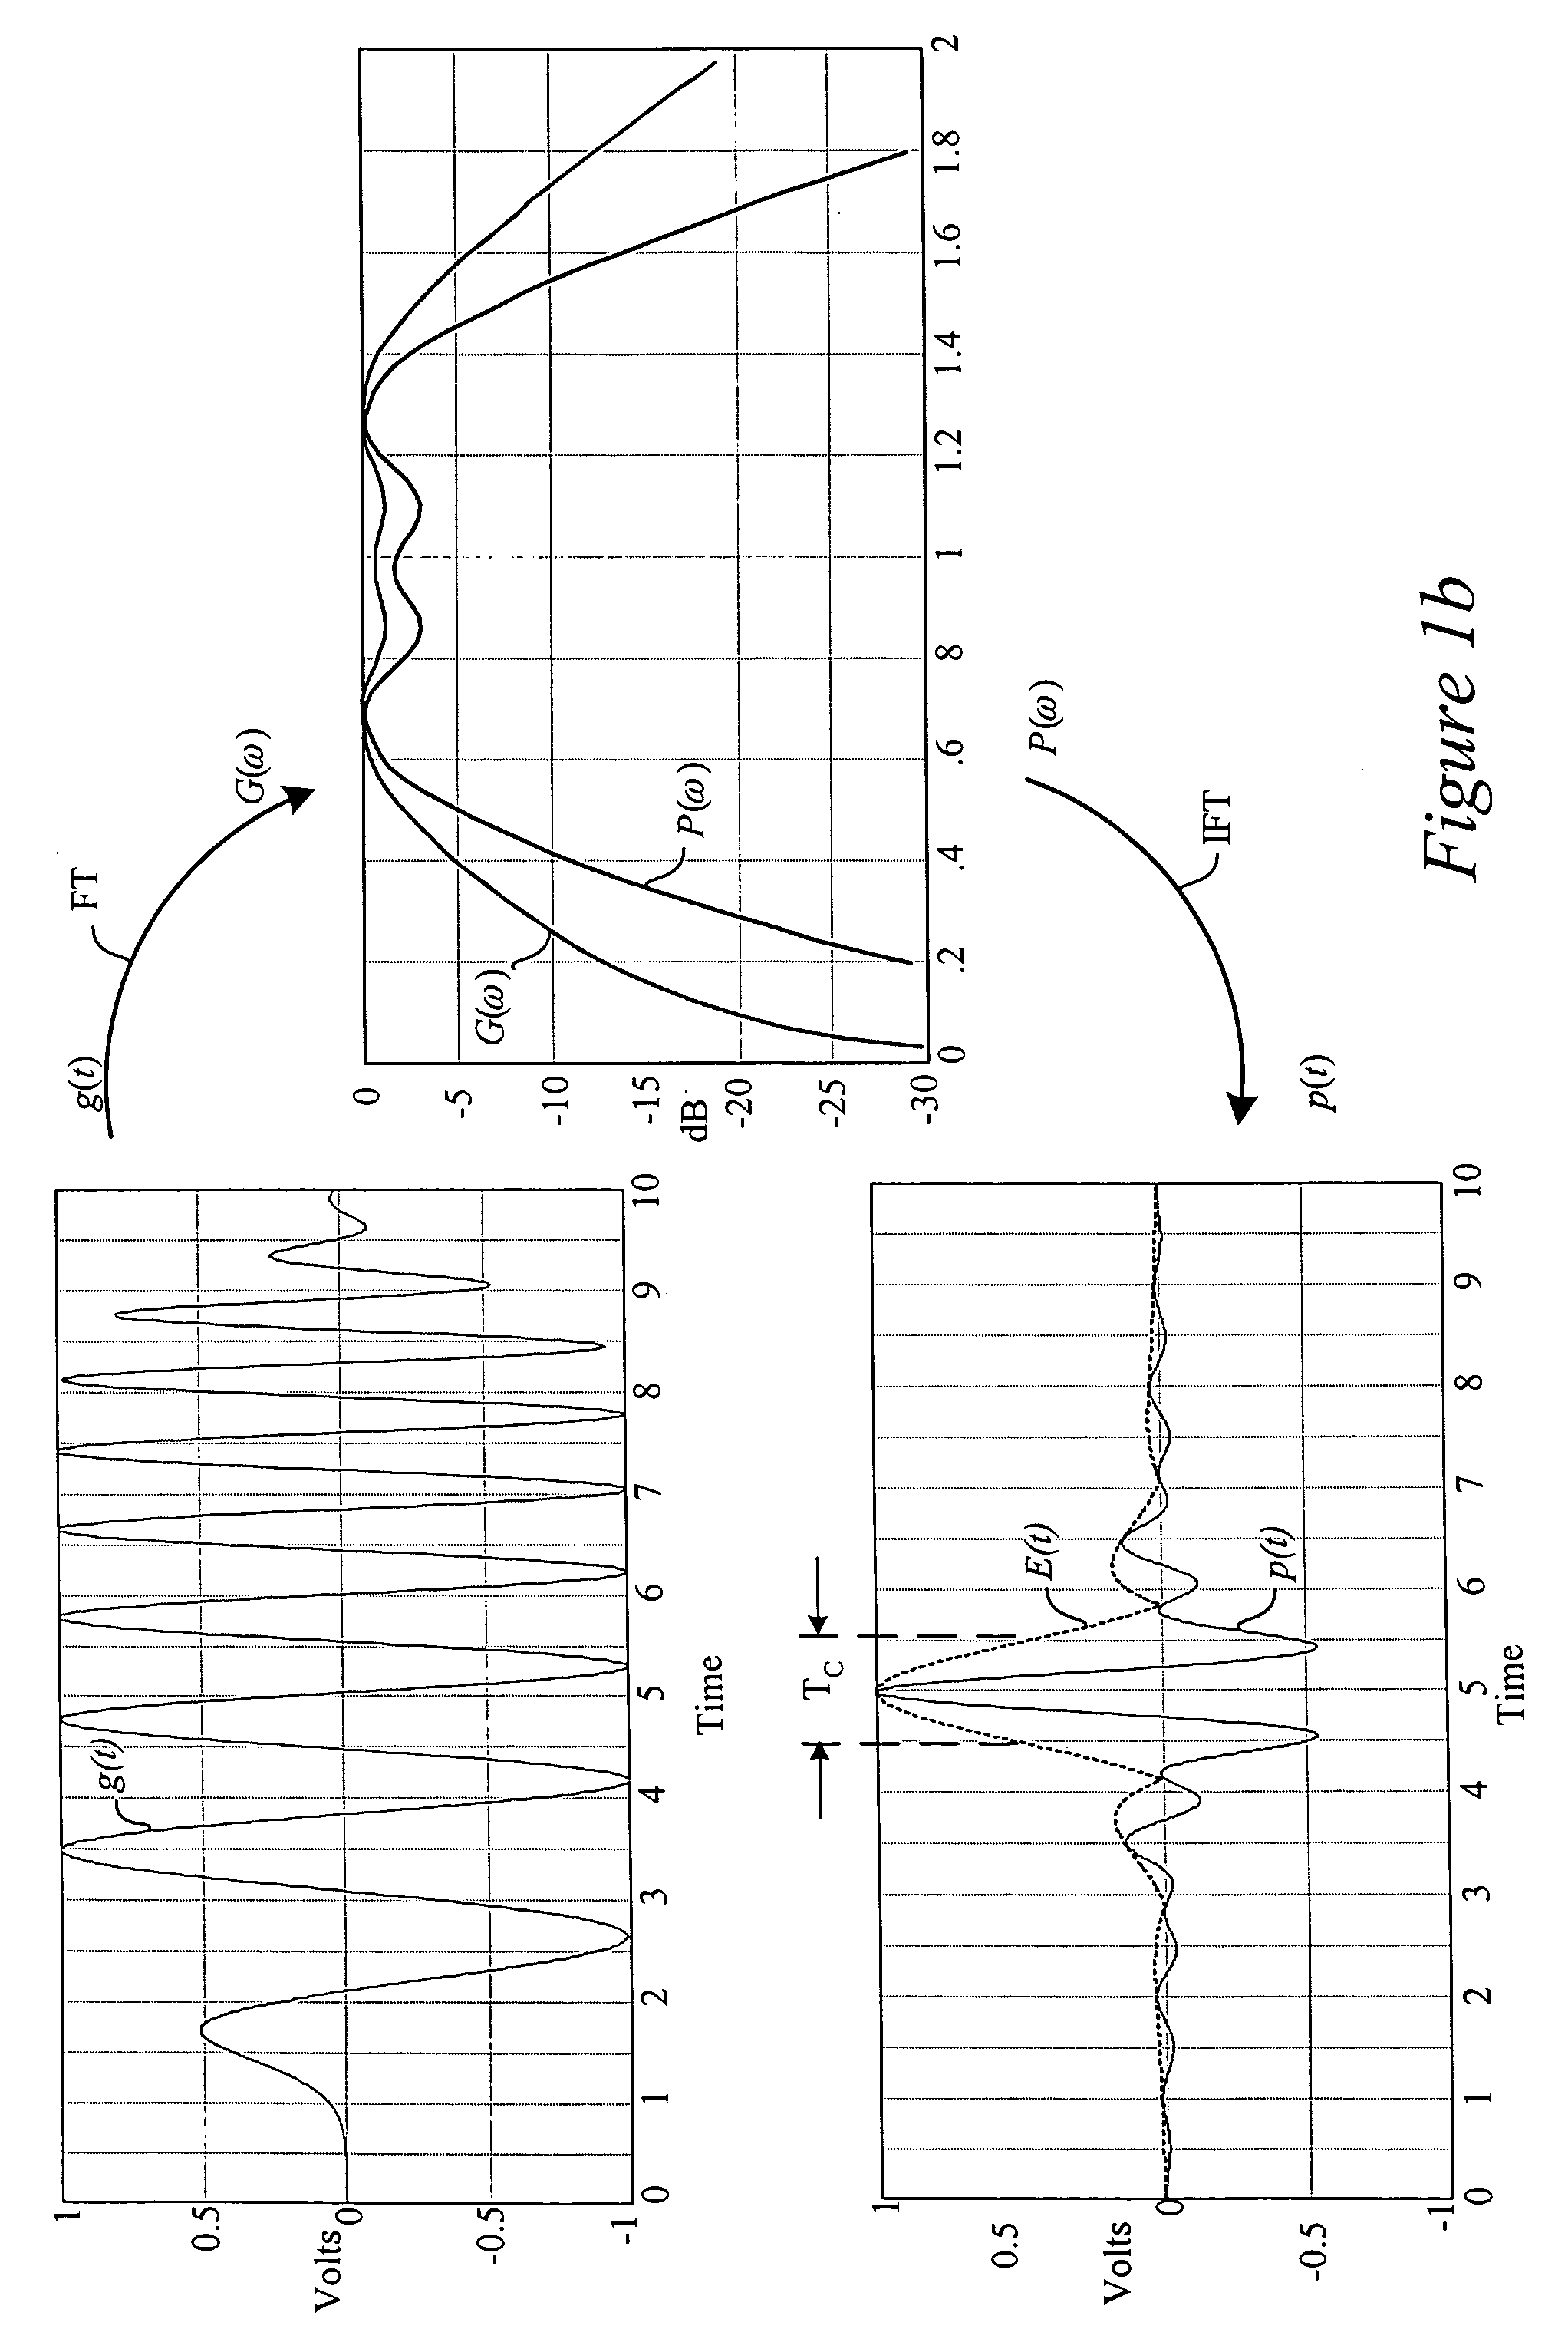 Low power, high resolution timing generator for ultra-wide bandwidth communication systems